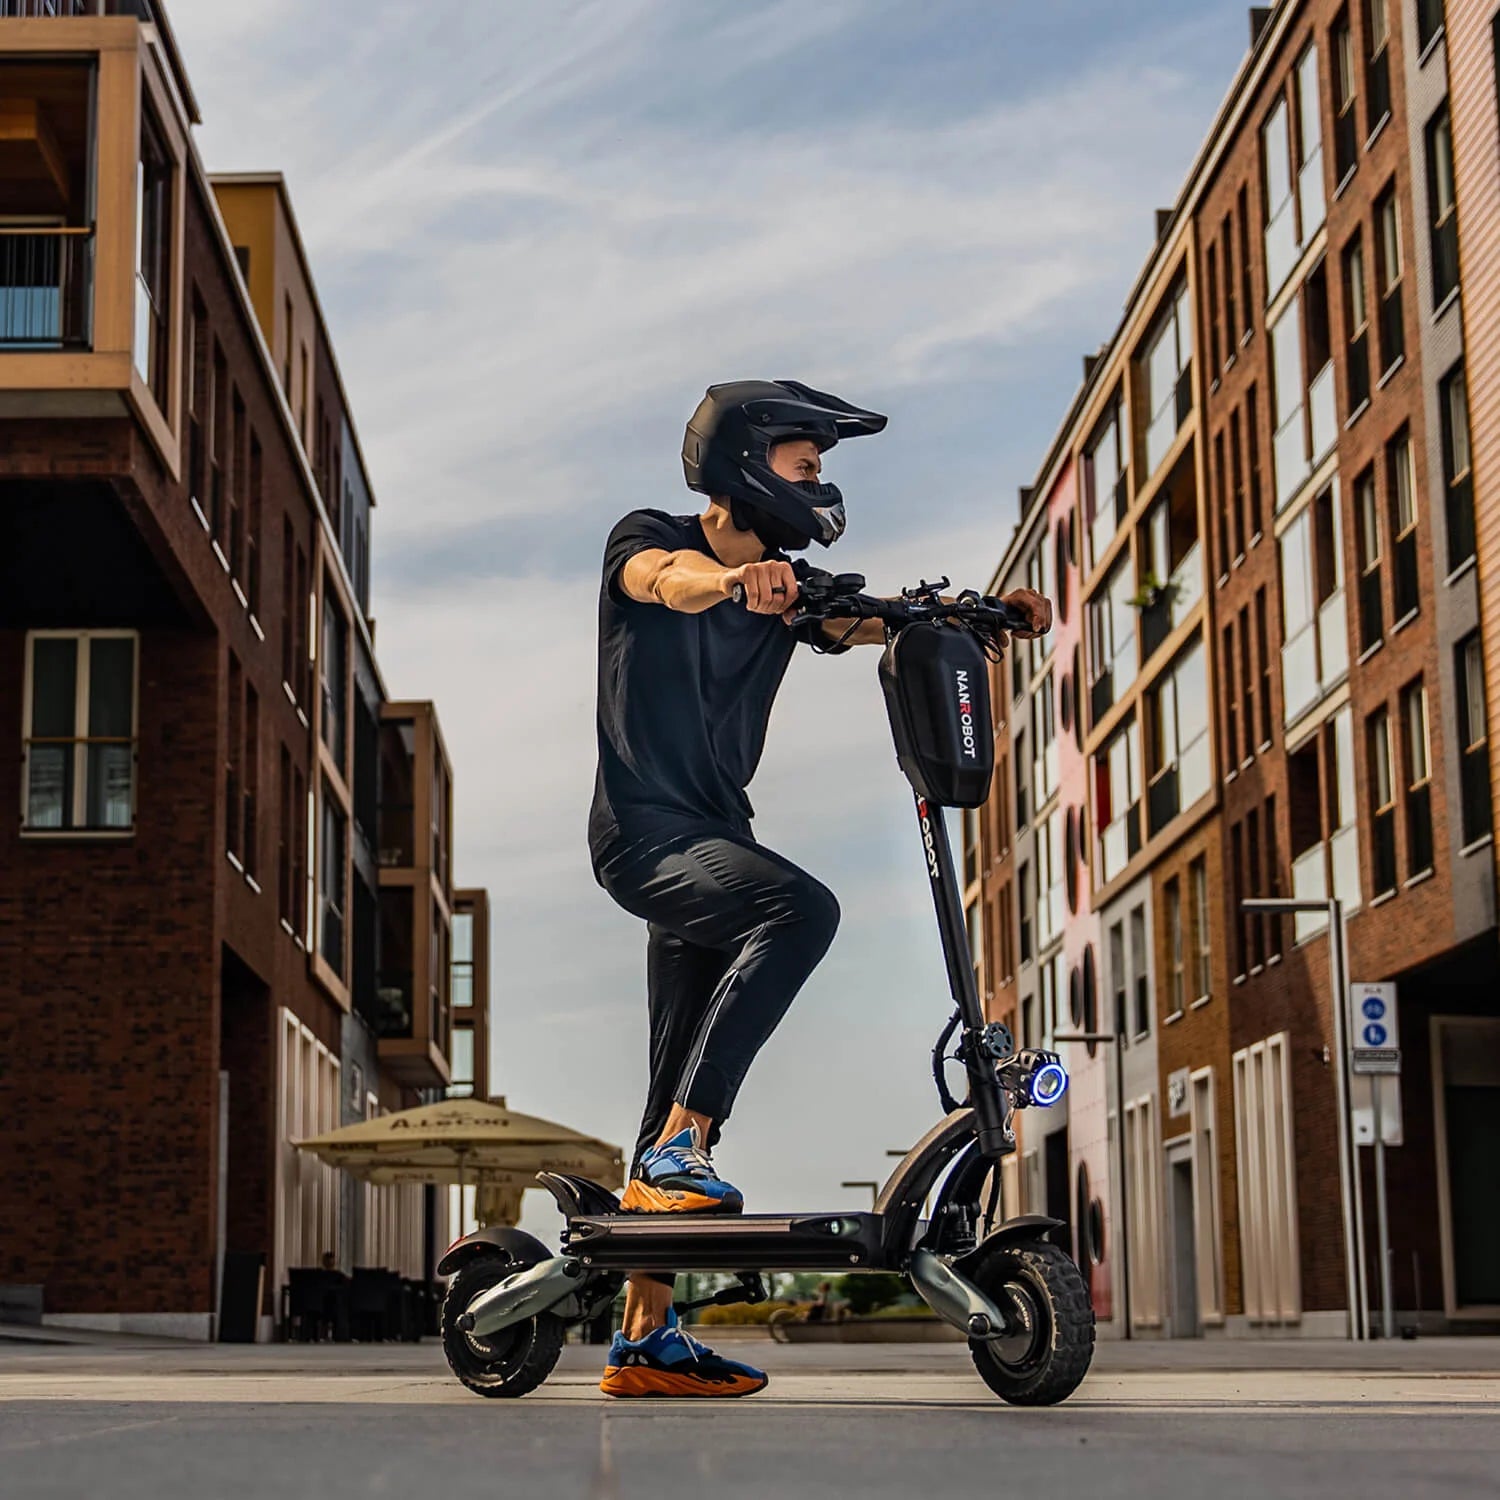 D6 OFF Road Electric Scooter 2000W